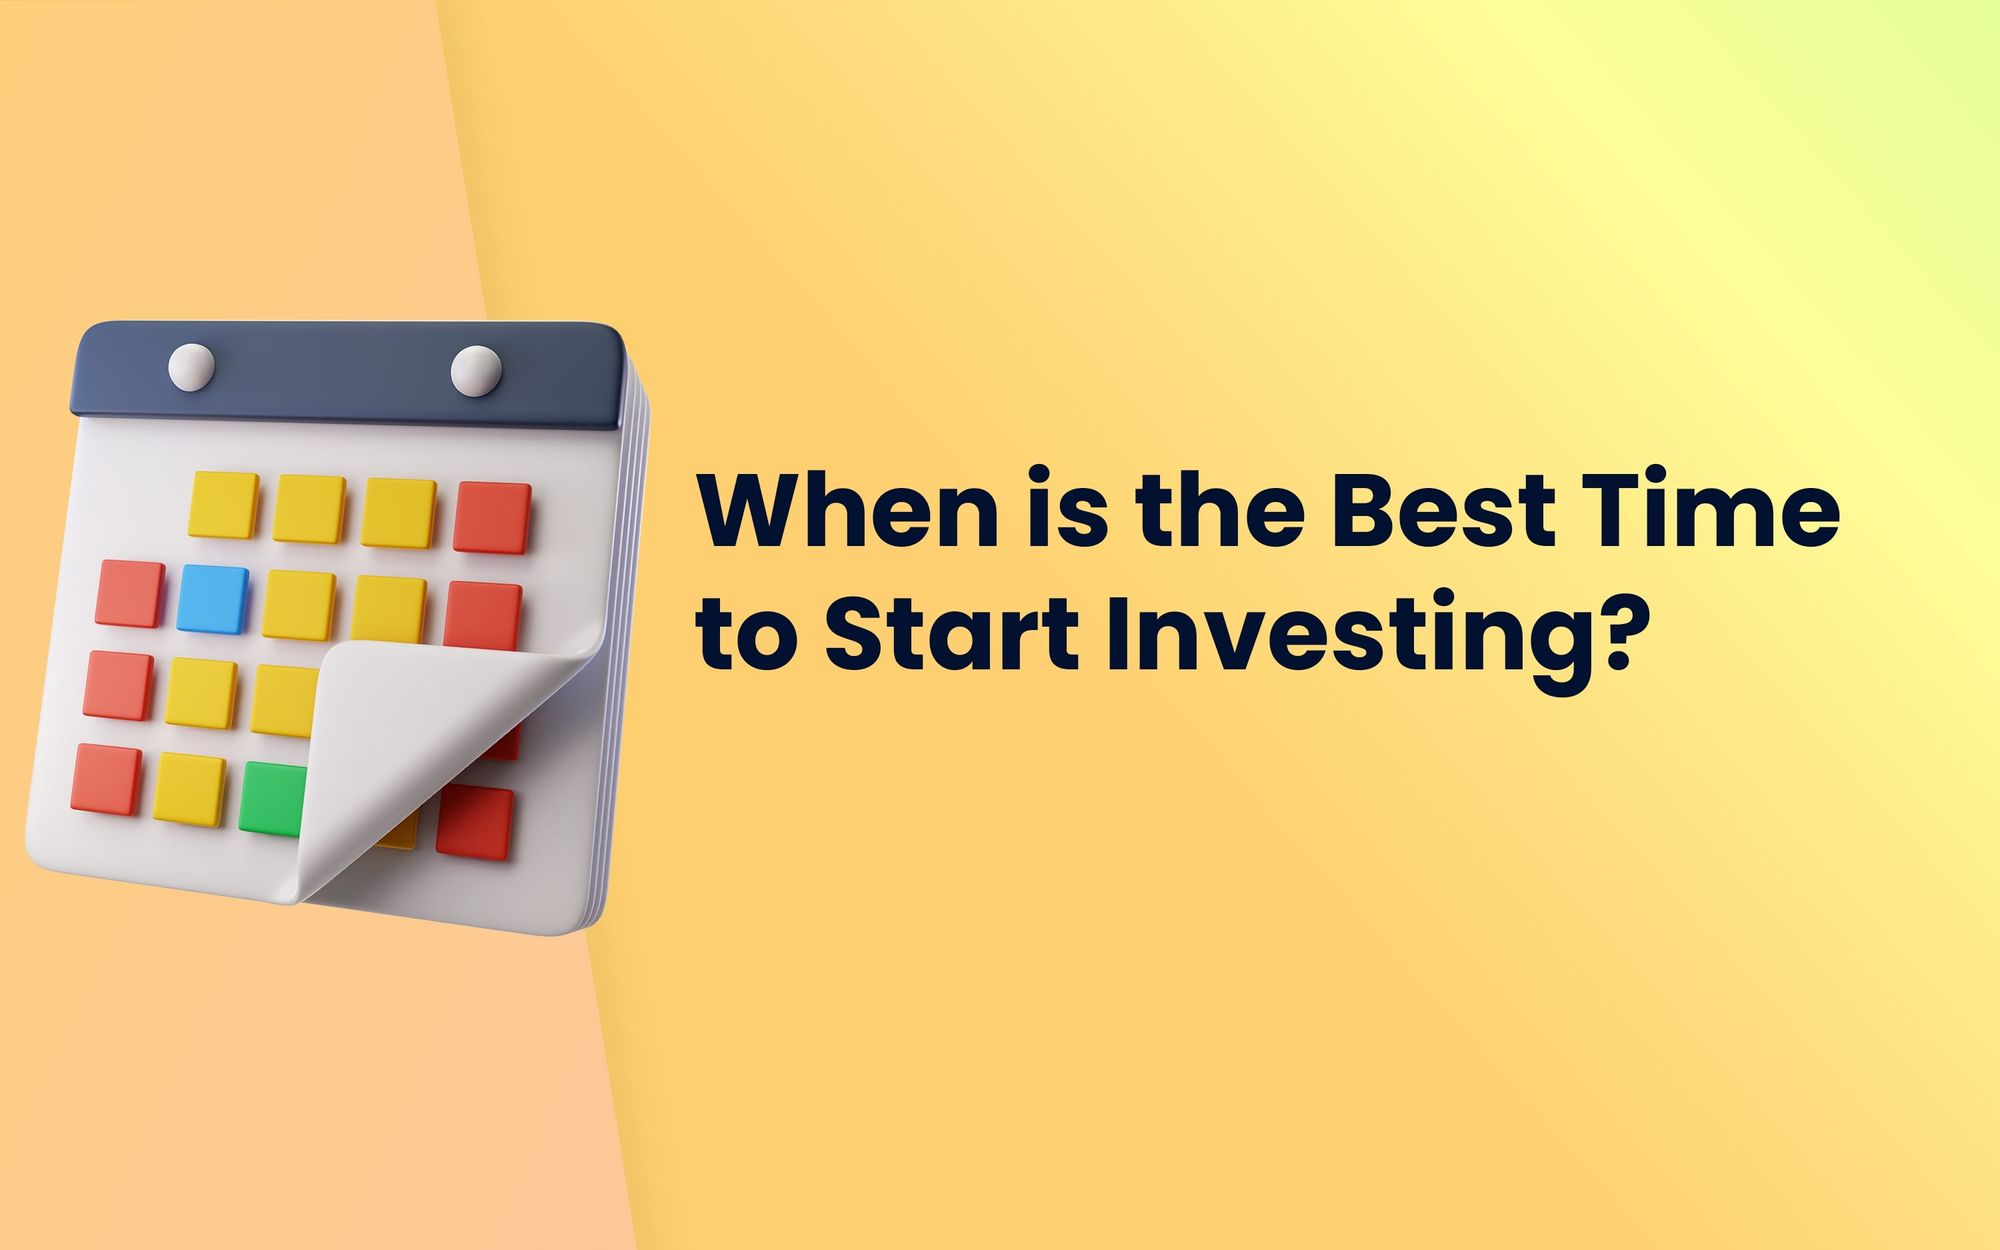 When is the Best Time to Start Investing? | Pints